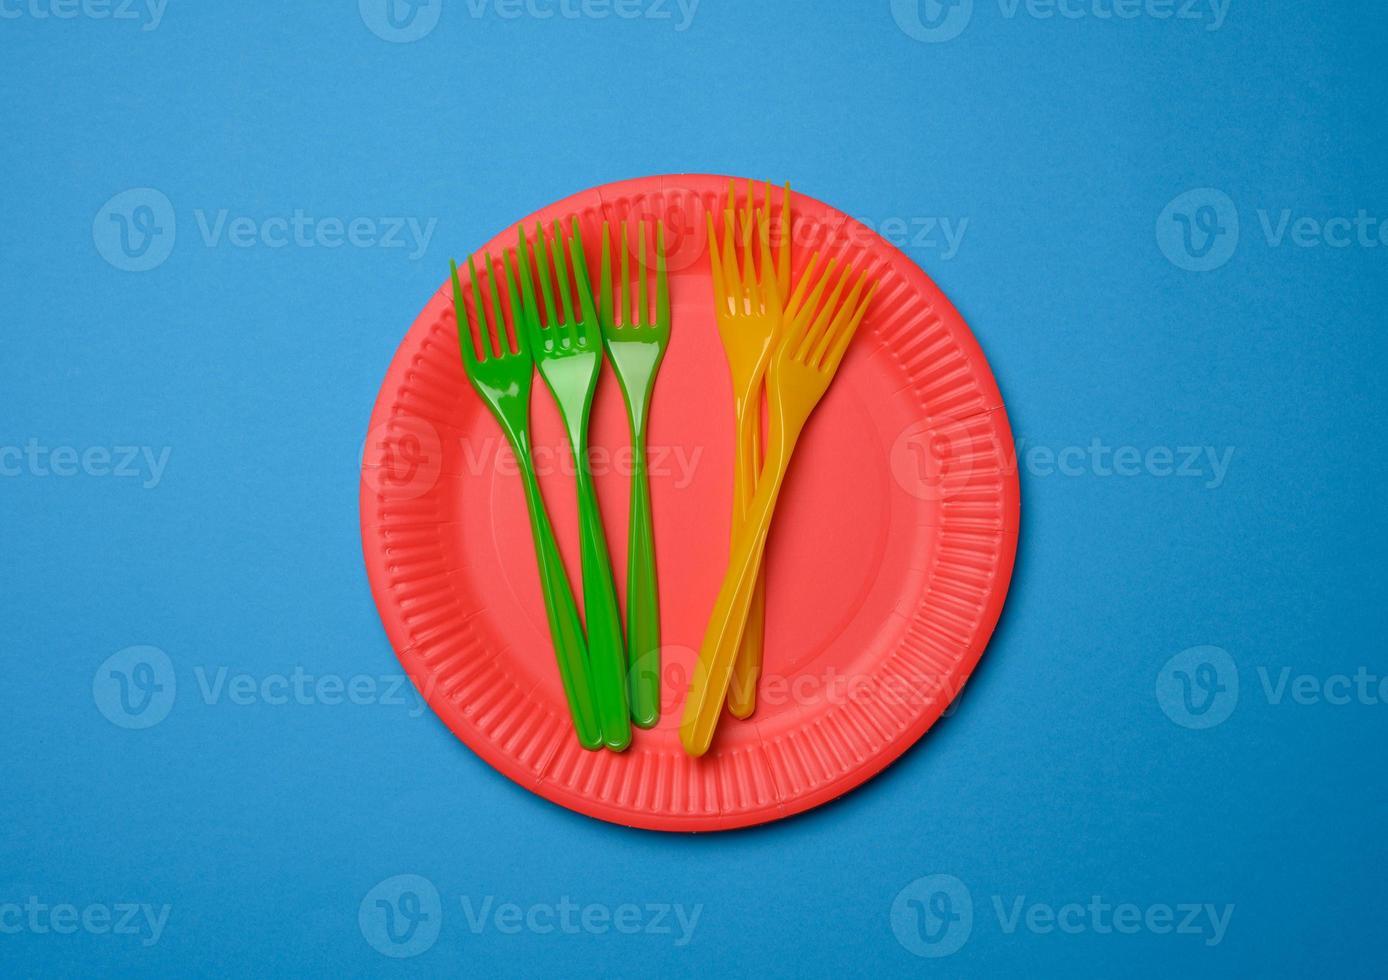 green, orange plastic forks and empty red paper disposable plates on a blue background photo